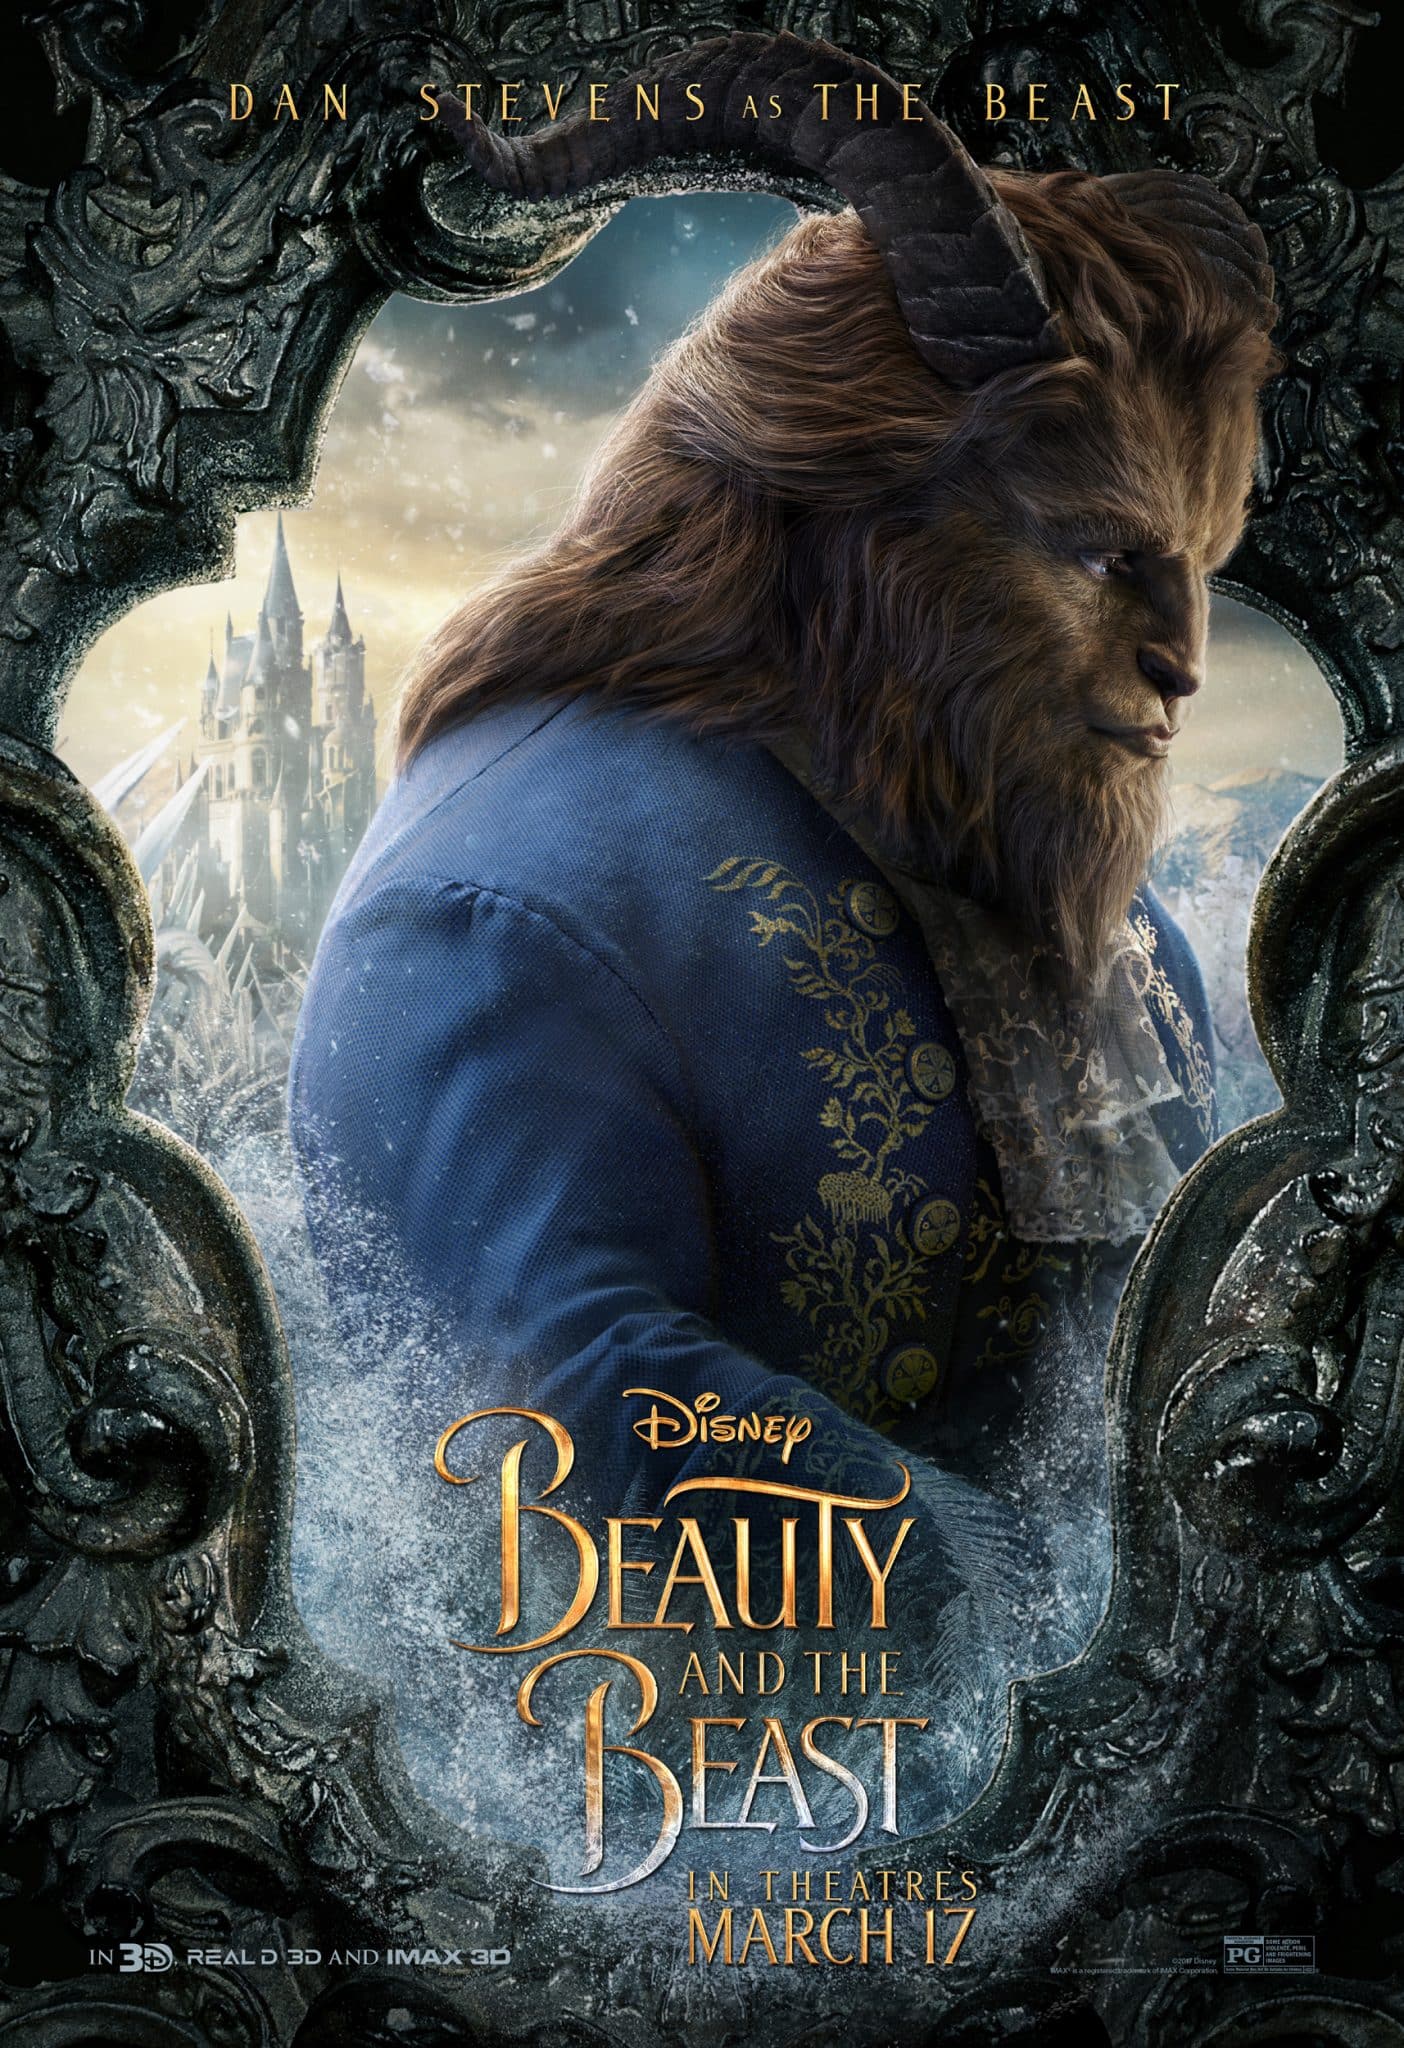 Character Posters for Disney's Beauty And The Beast #BeOurGuest #BeautyAndTheBeast